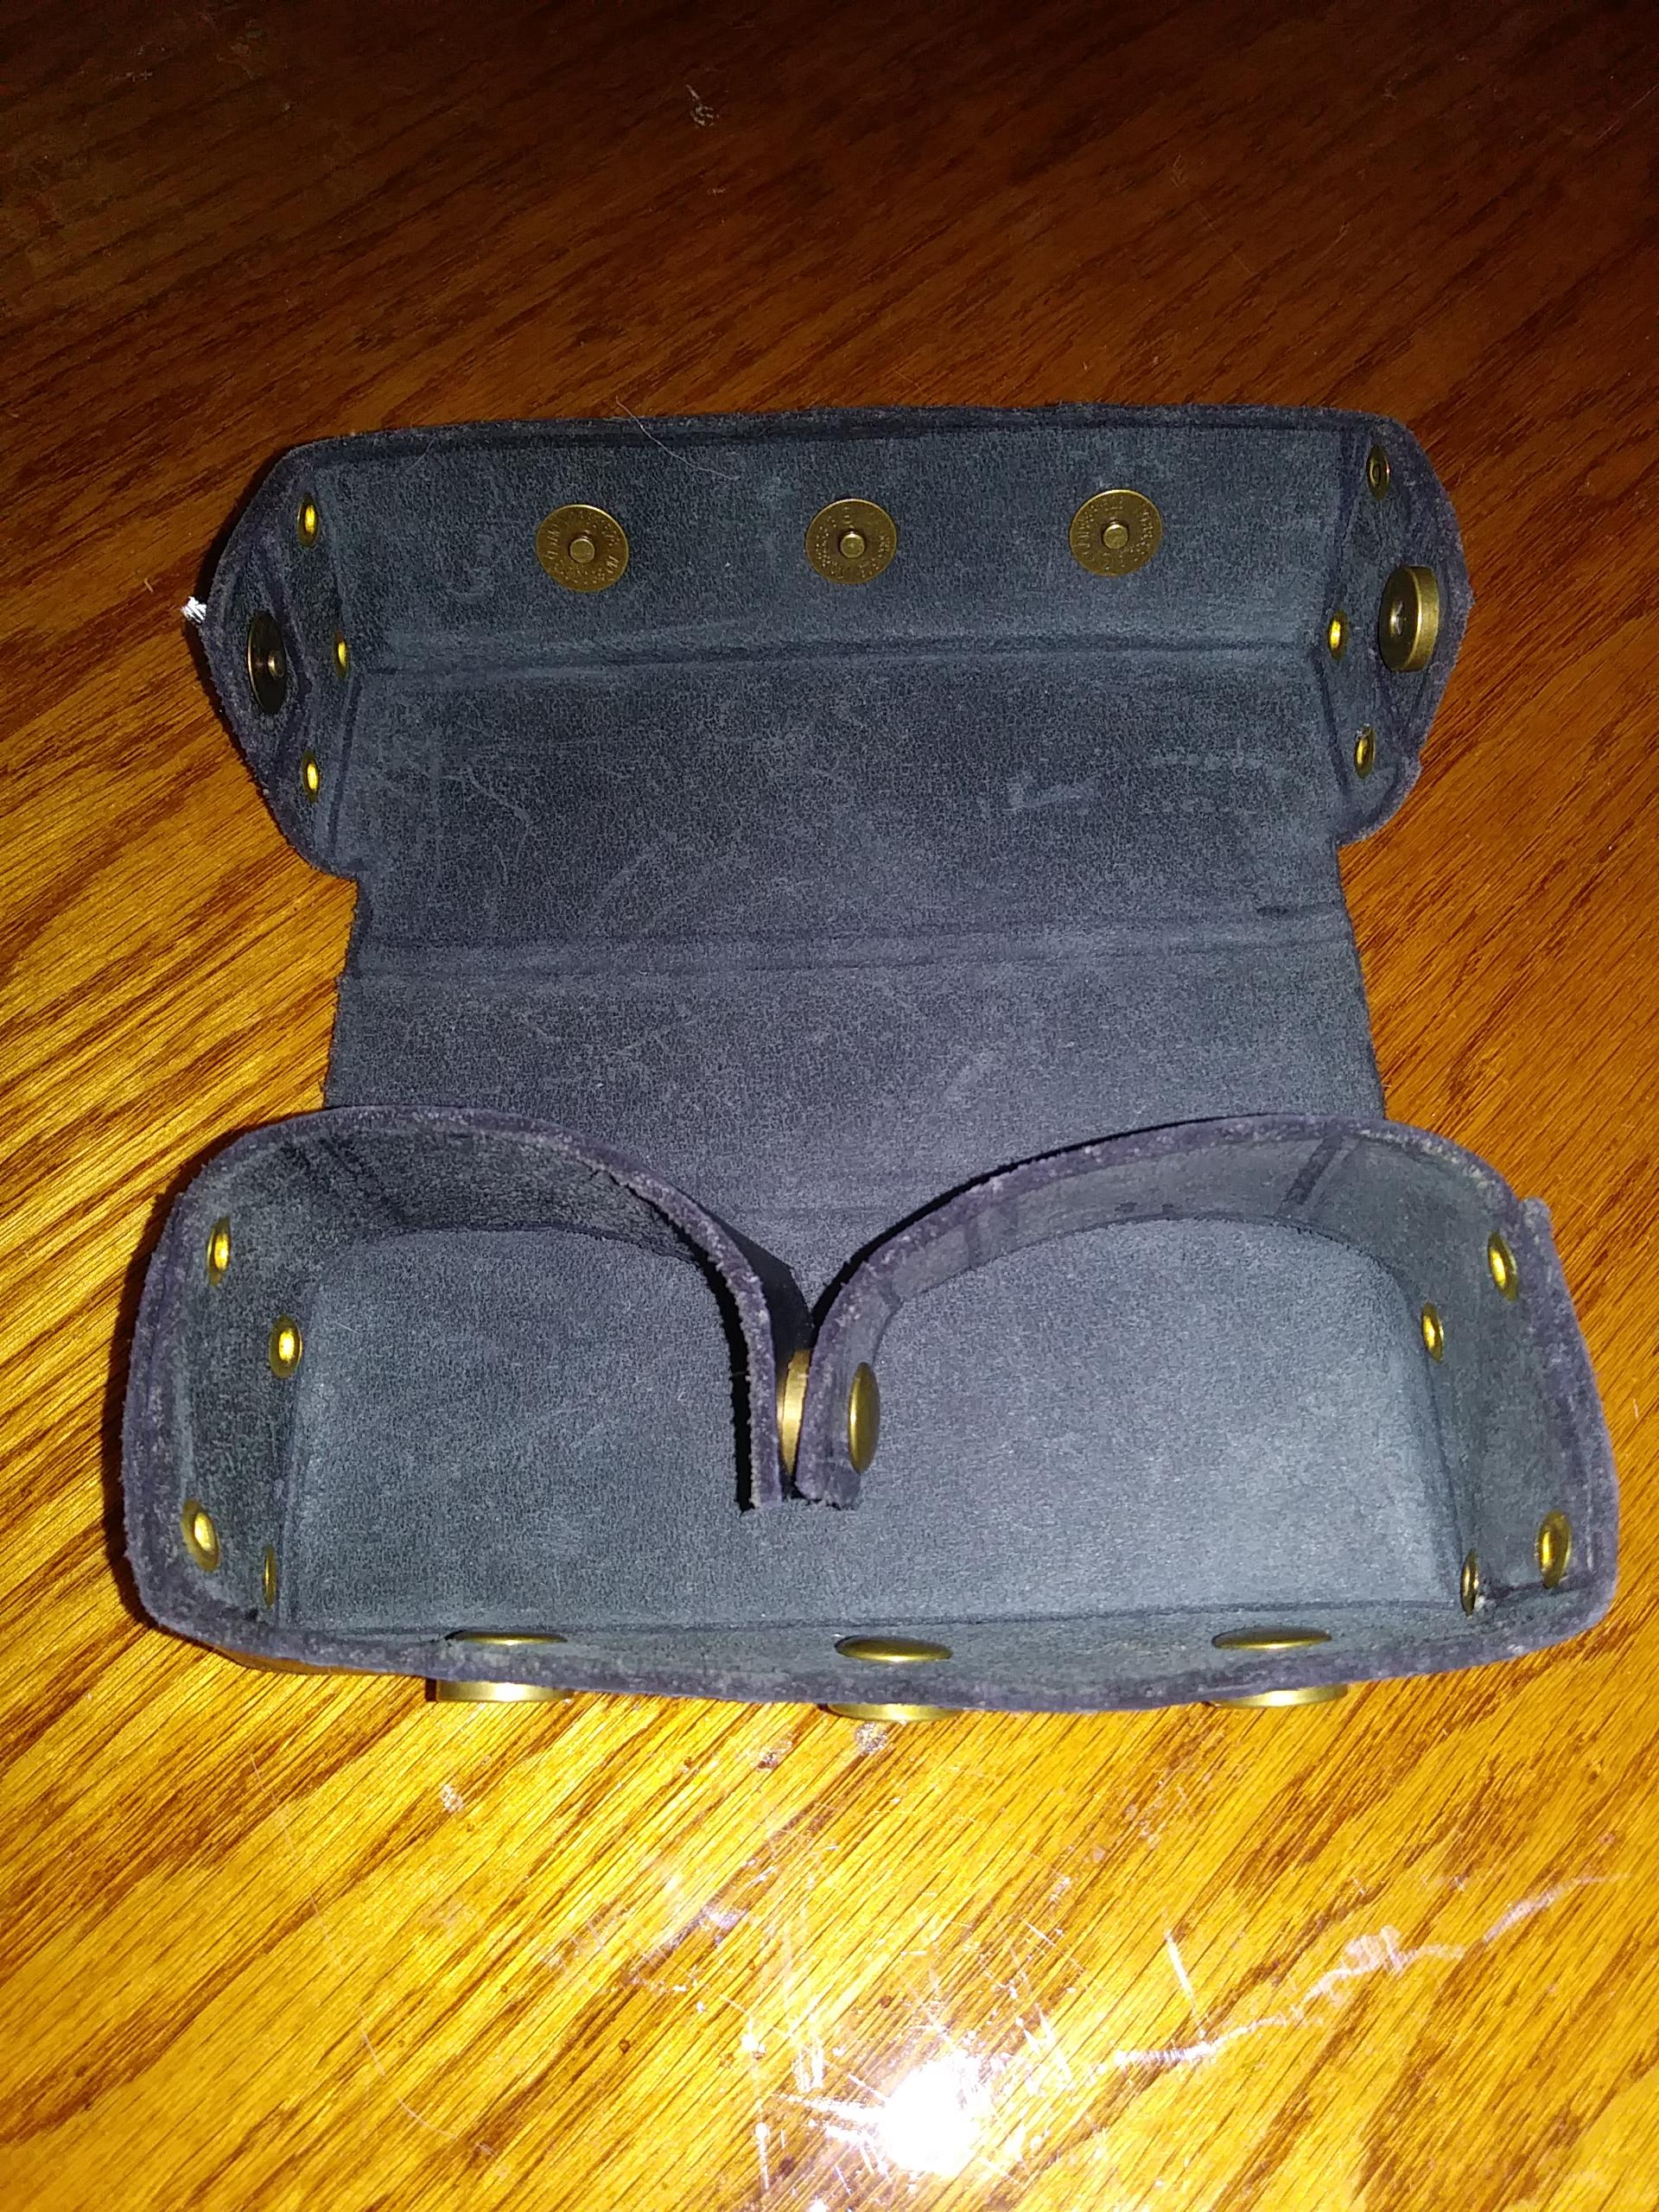 simple storage tray open inside flaps holding dice.jpg